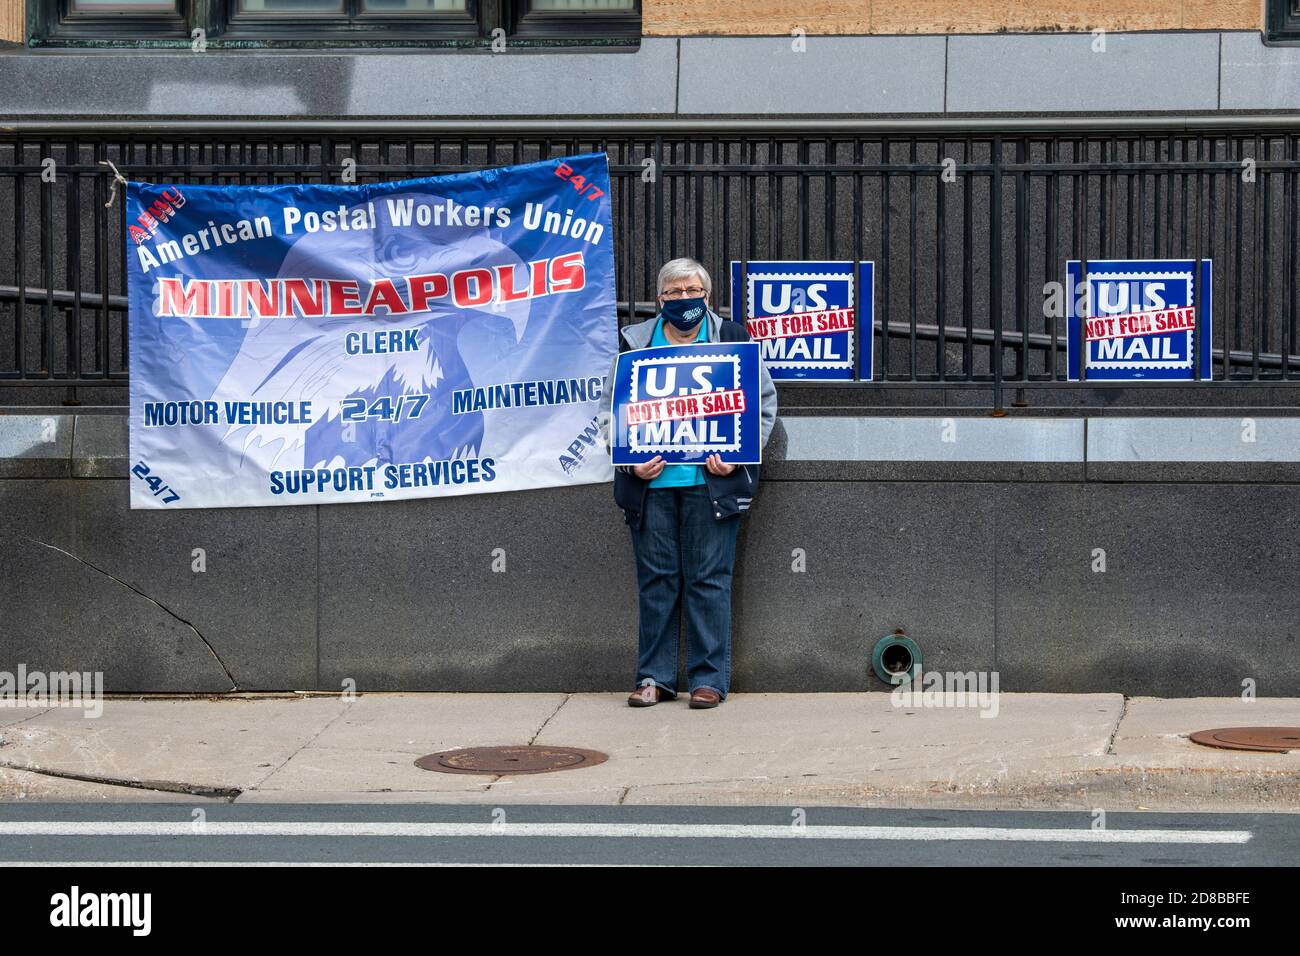 Minneapolis, Minnesota. Postal workers rally to demand that Congress act to save the Postal Service. Stock Photo